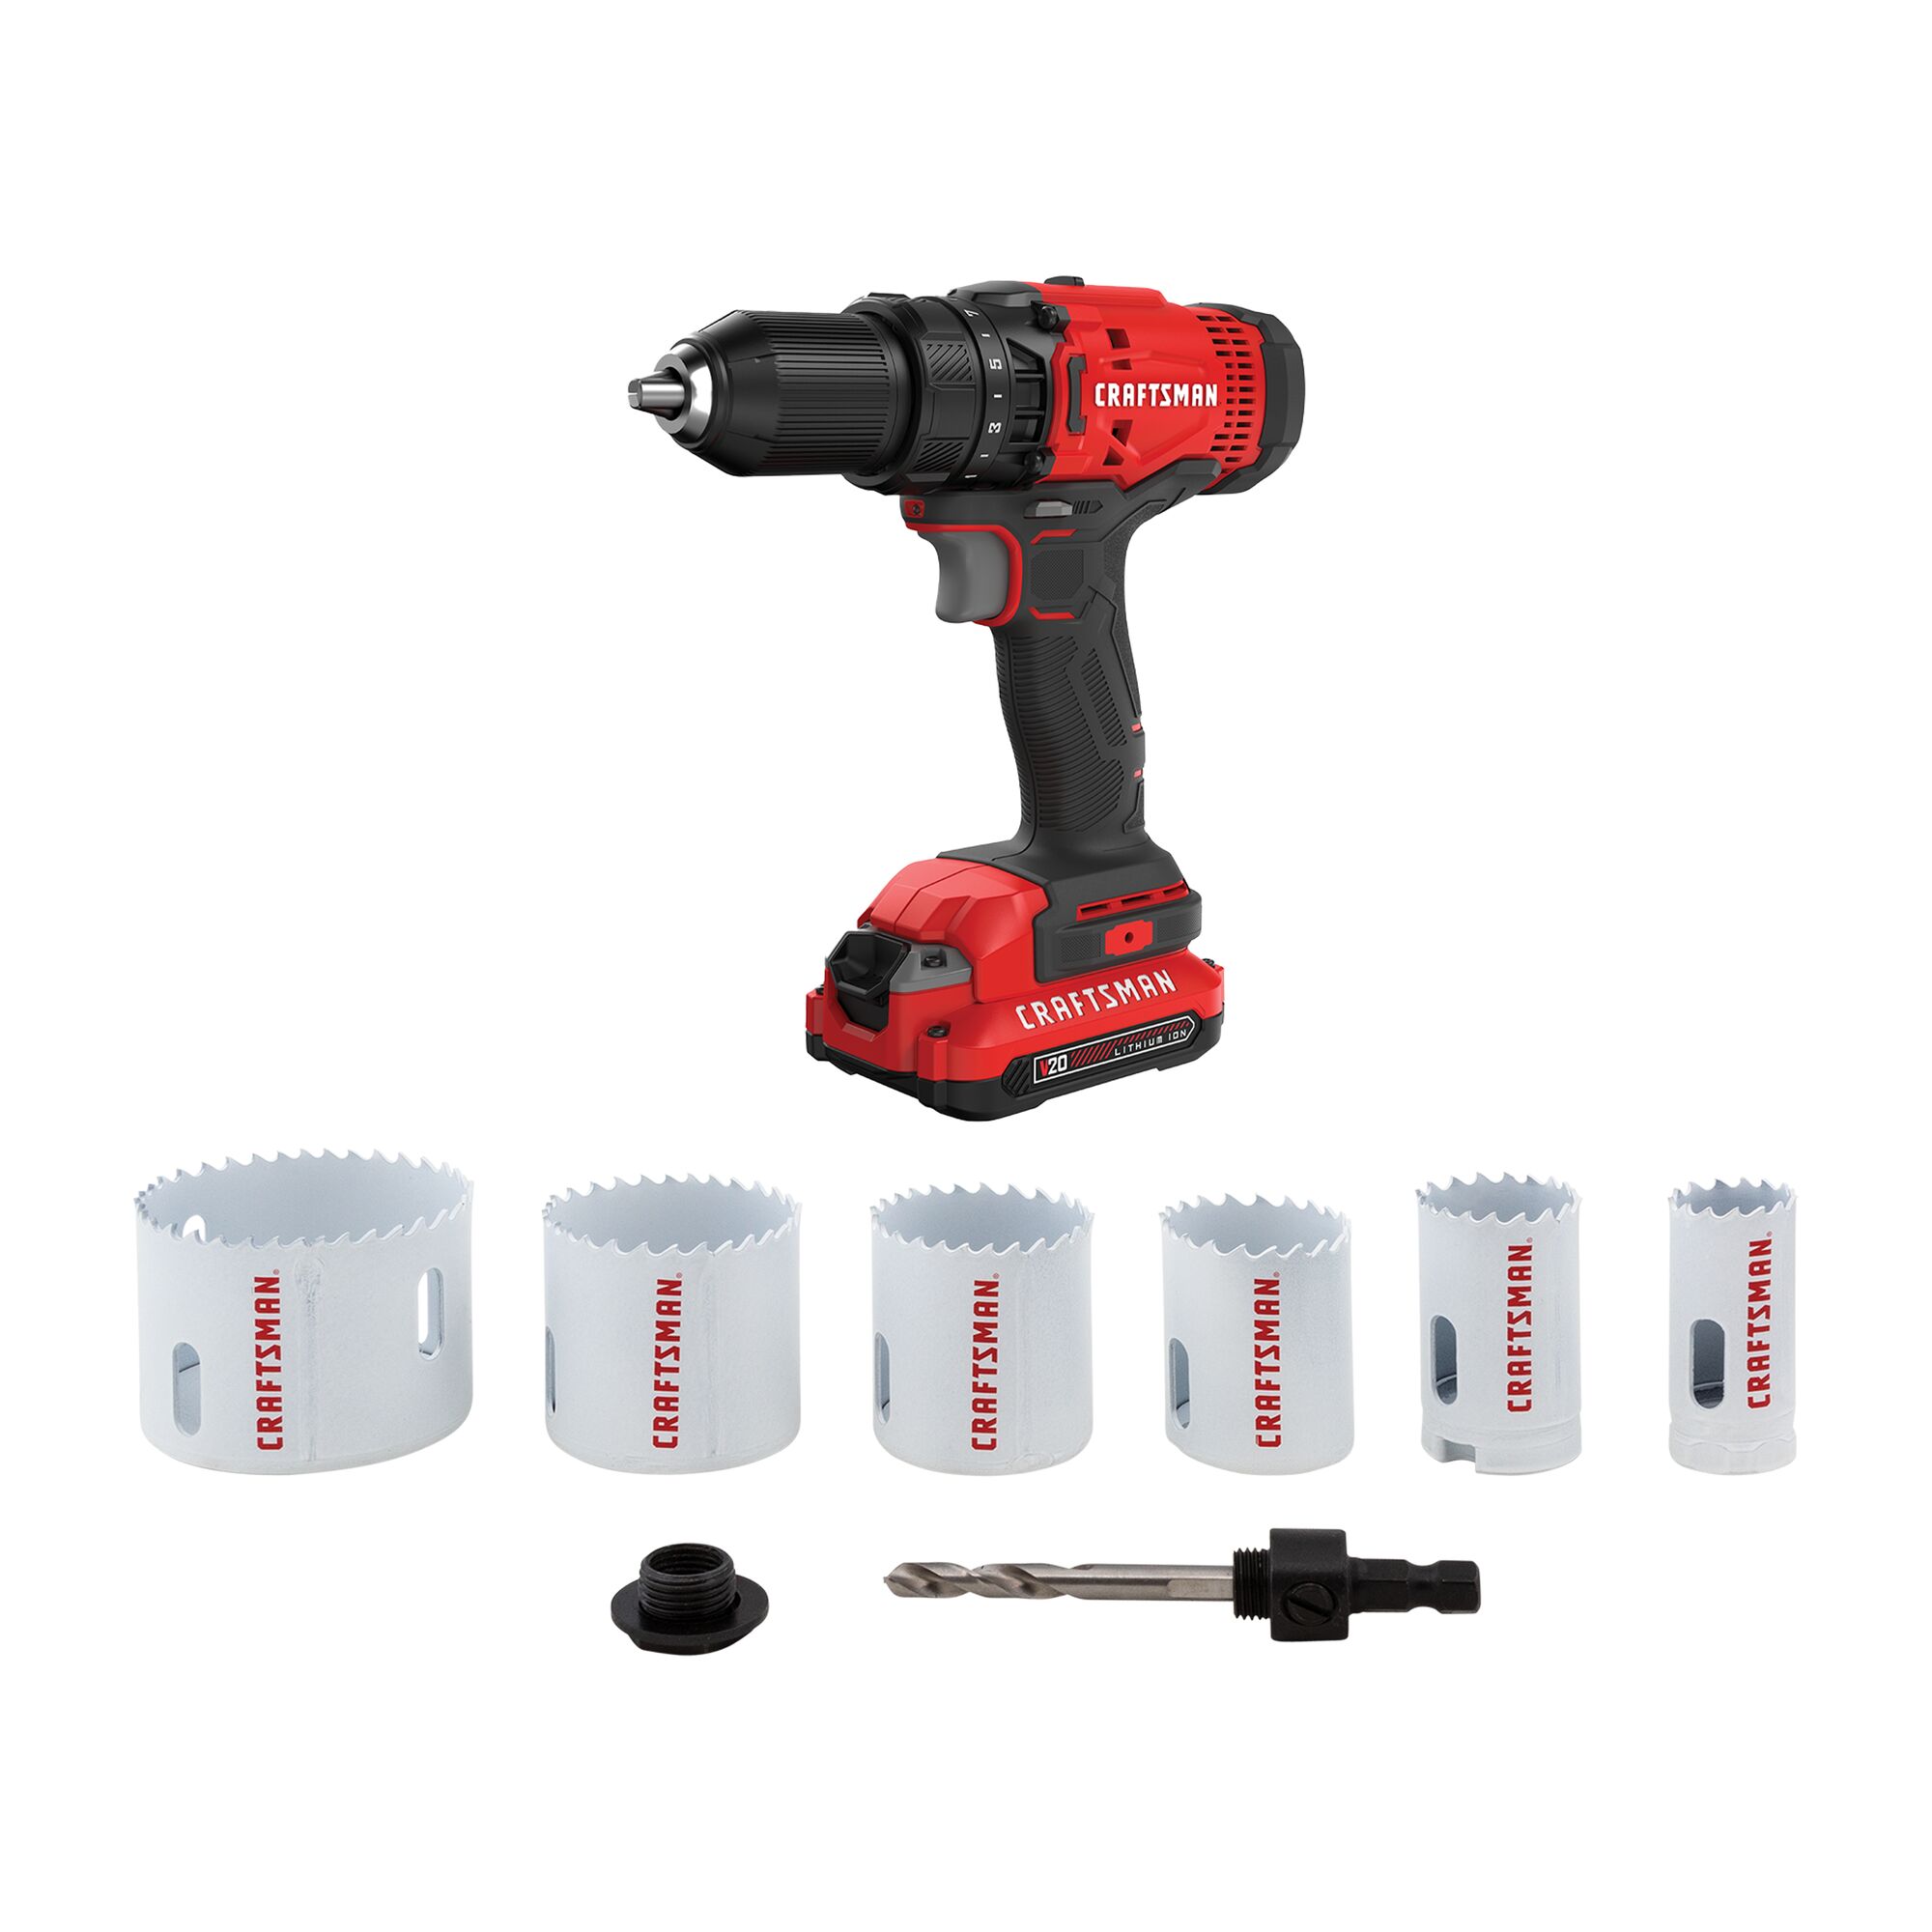 View of CRAFTSMAN Hole Saws family of products